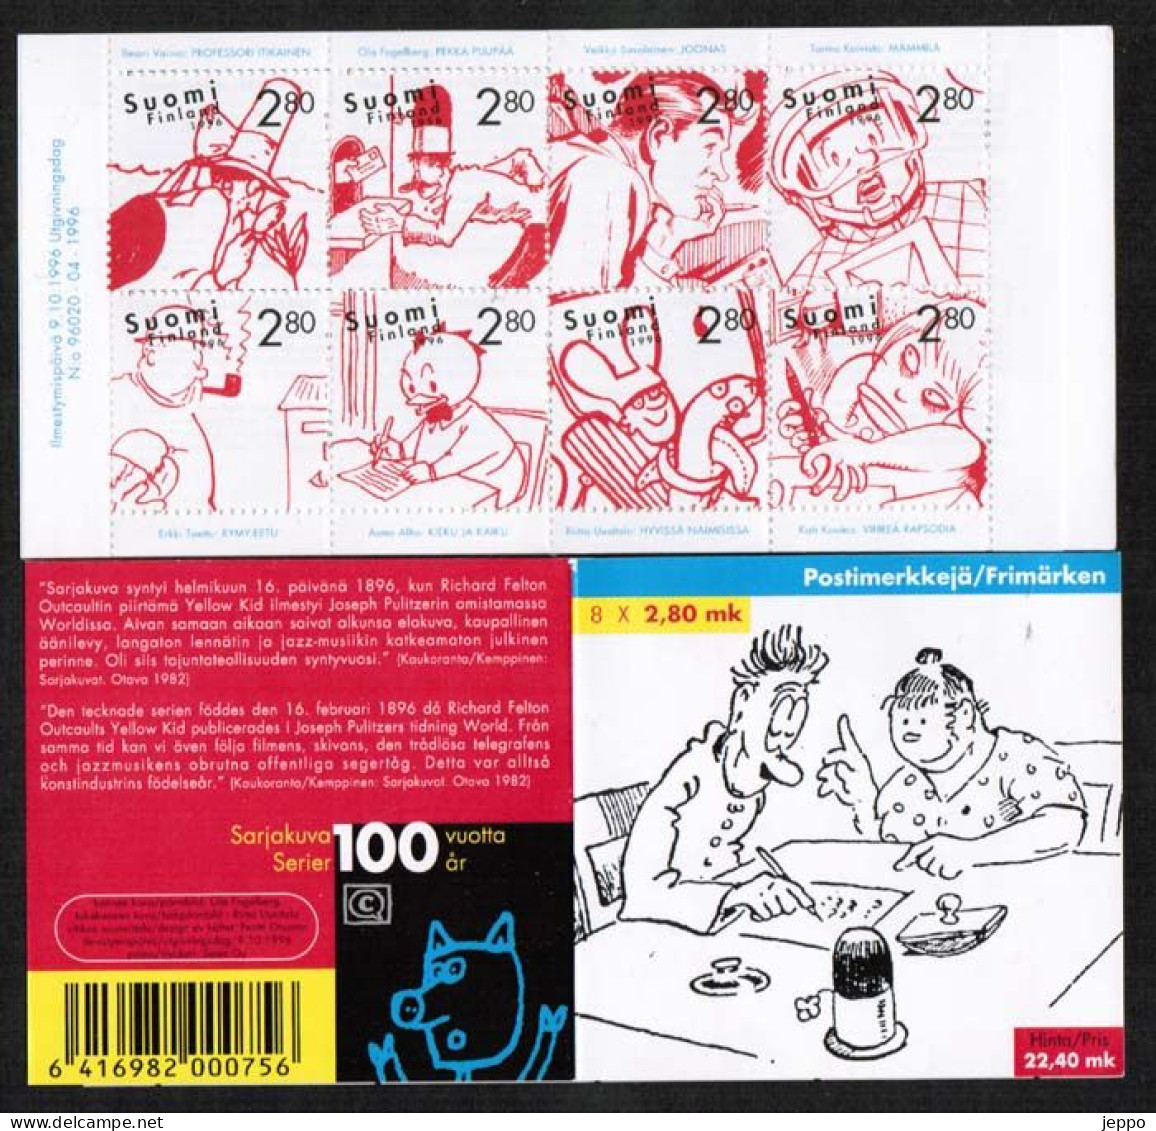 1996 Finland, Cartoons 100 Years, Booklet MNH. - Booklets